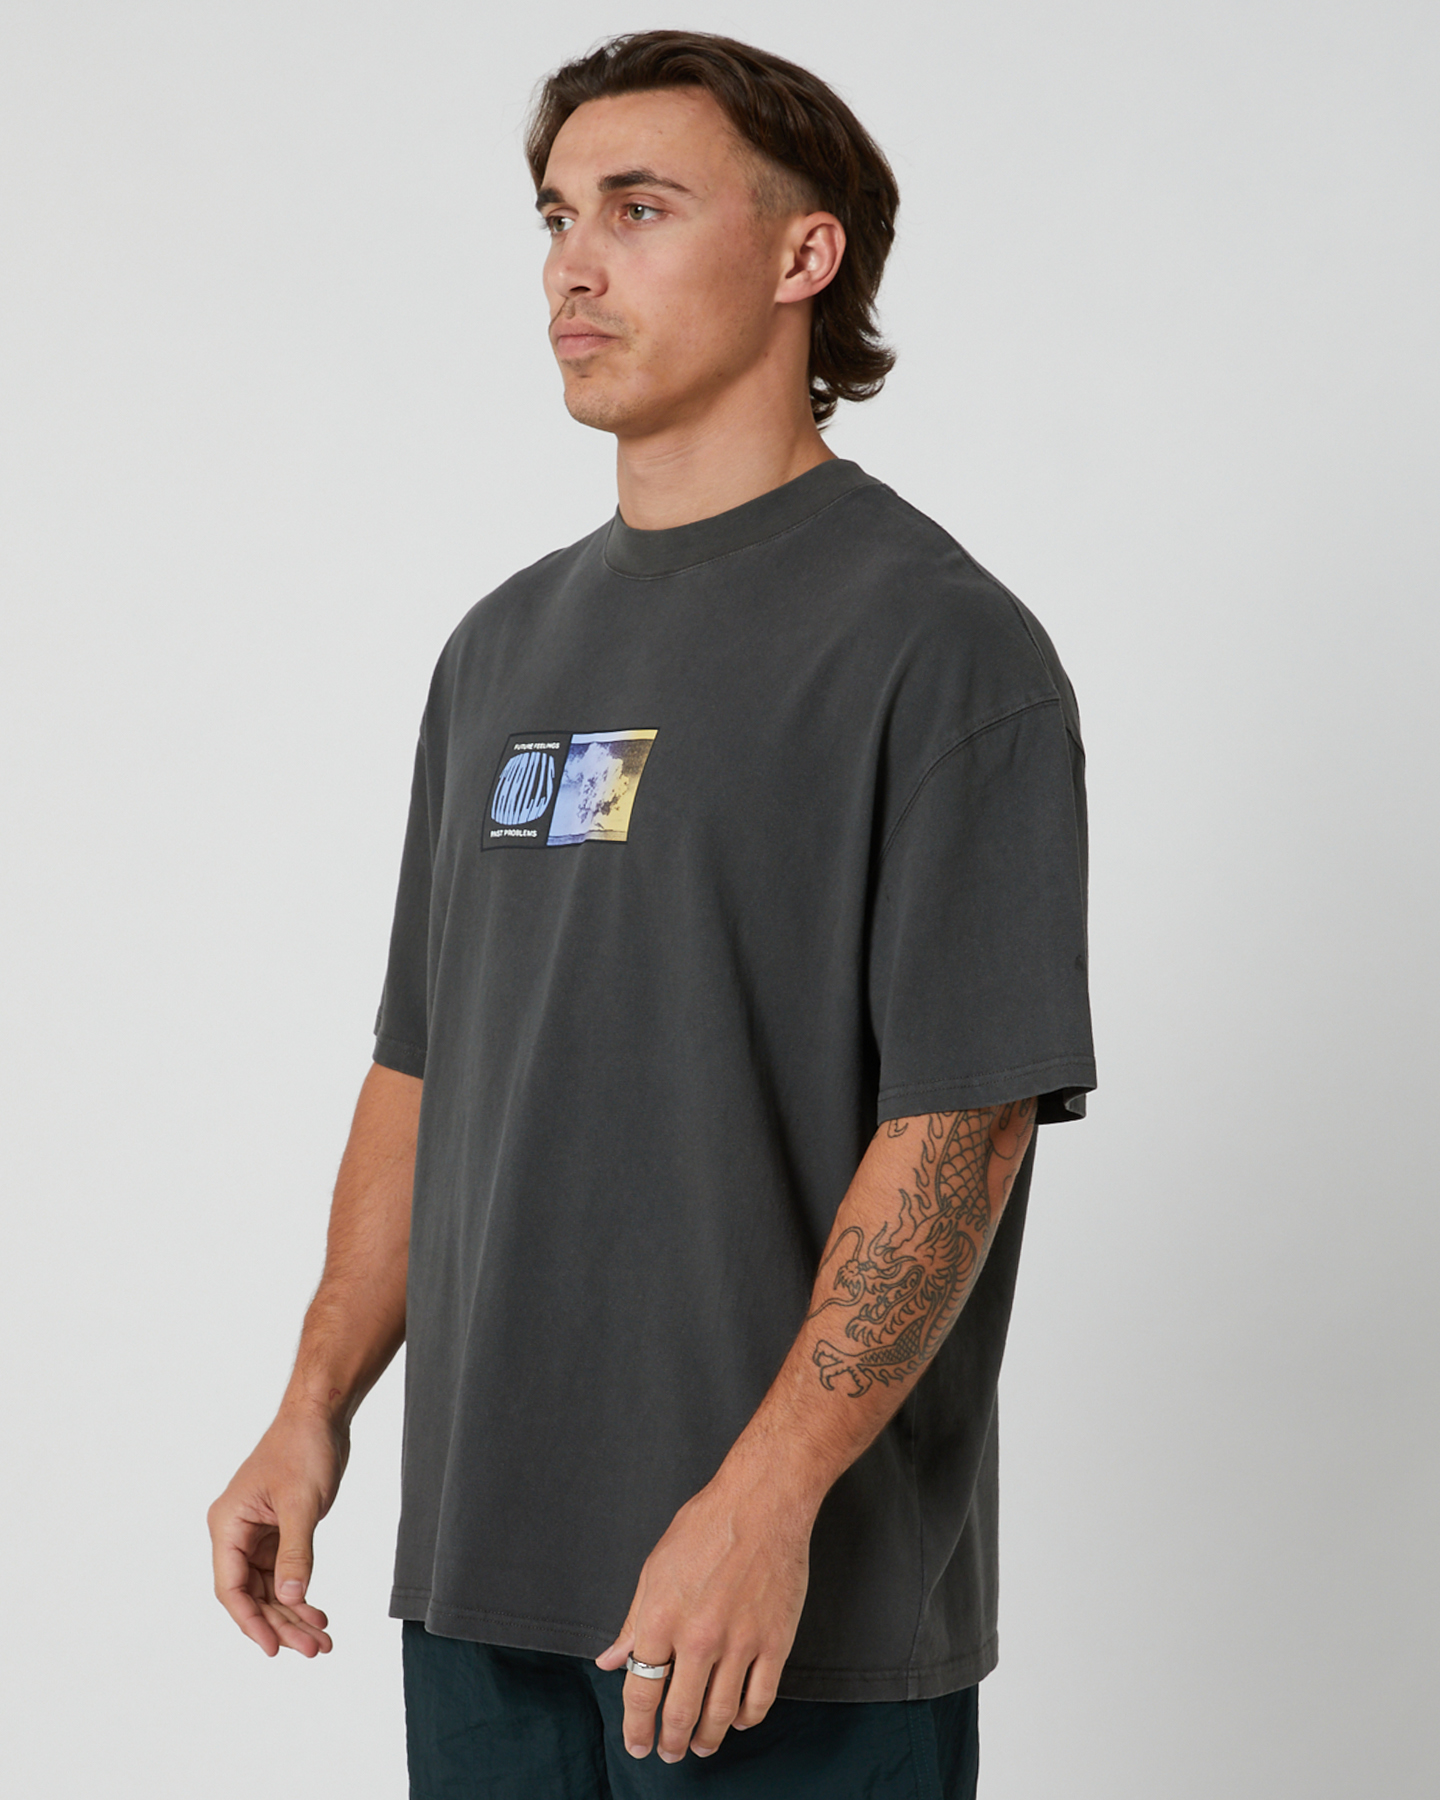 Thrills Actions Not Words Box Fit Oversize Tee - Merch Black | SurfStitch